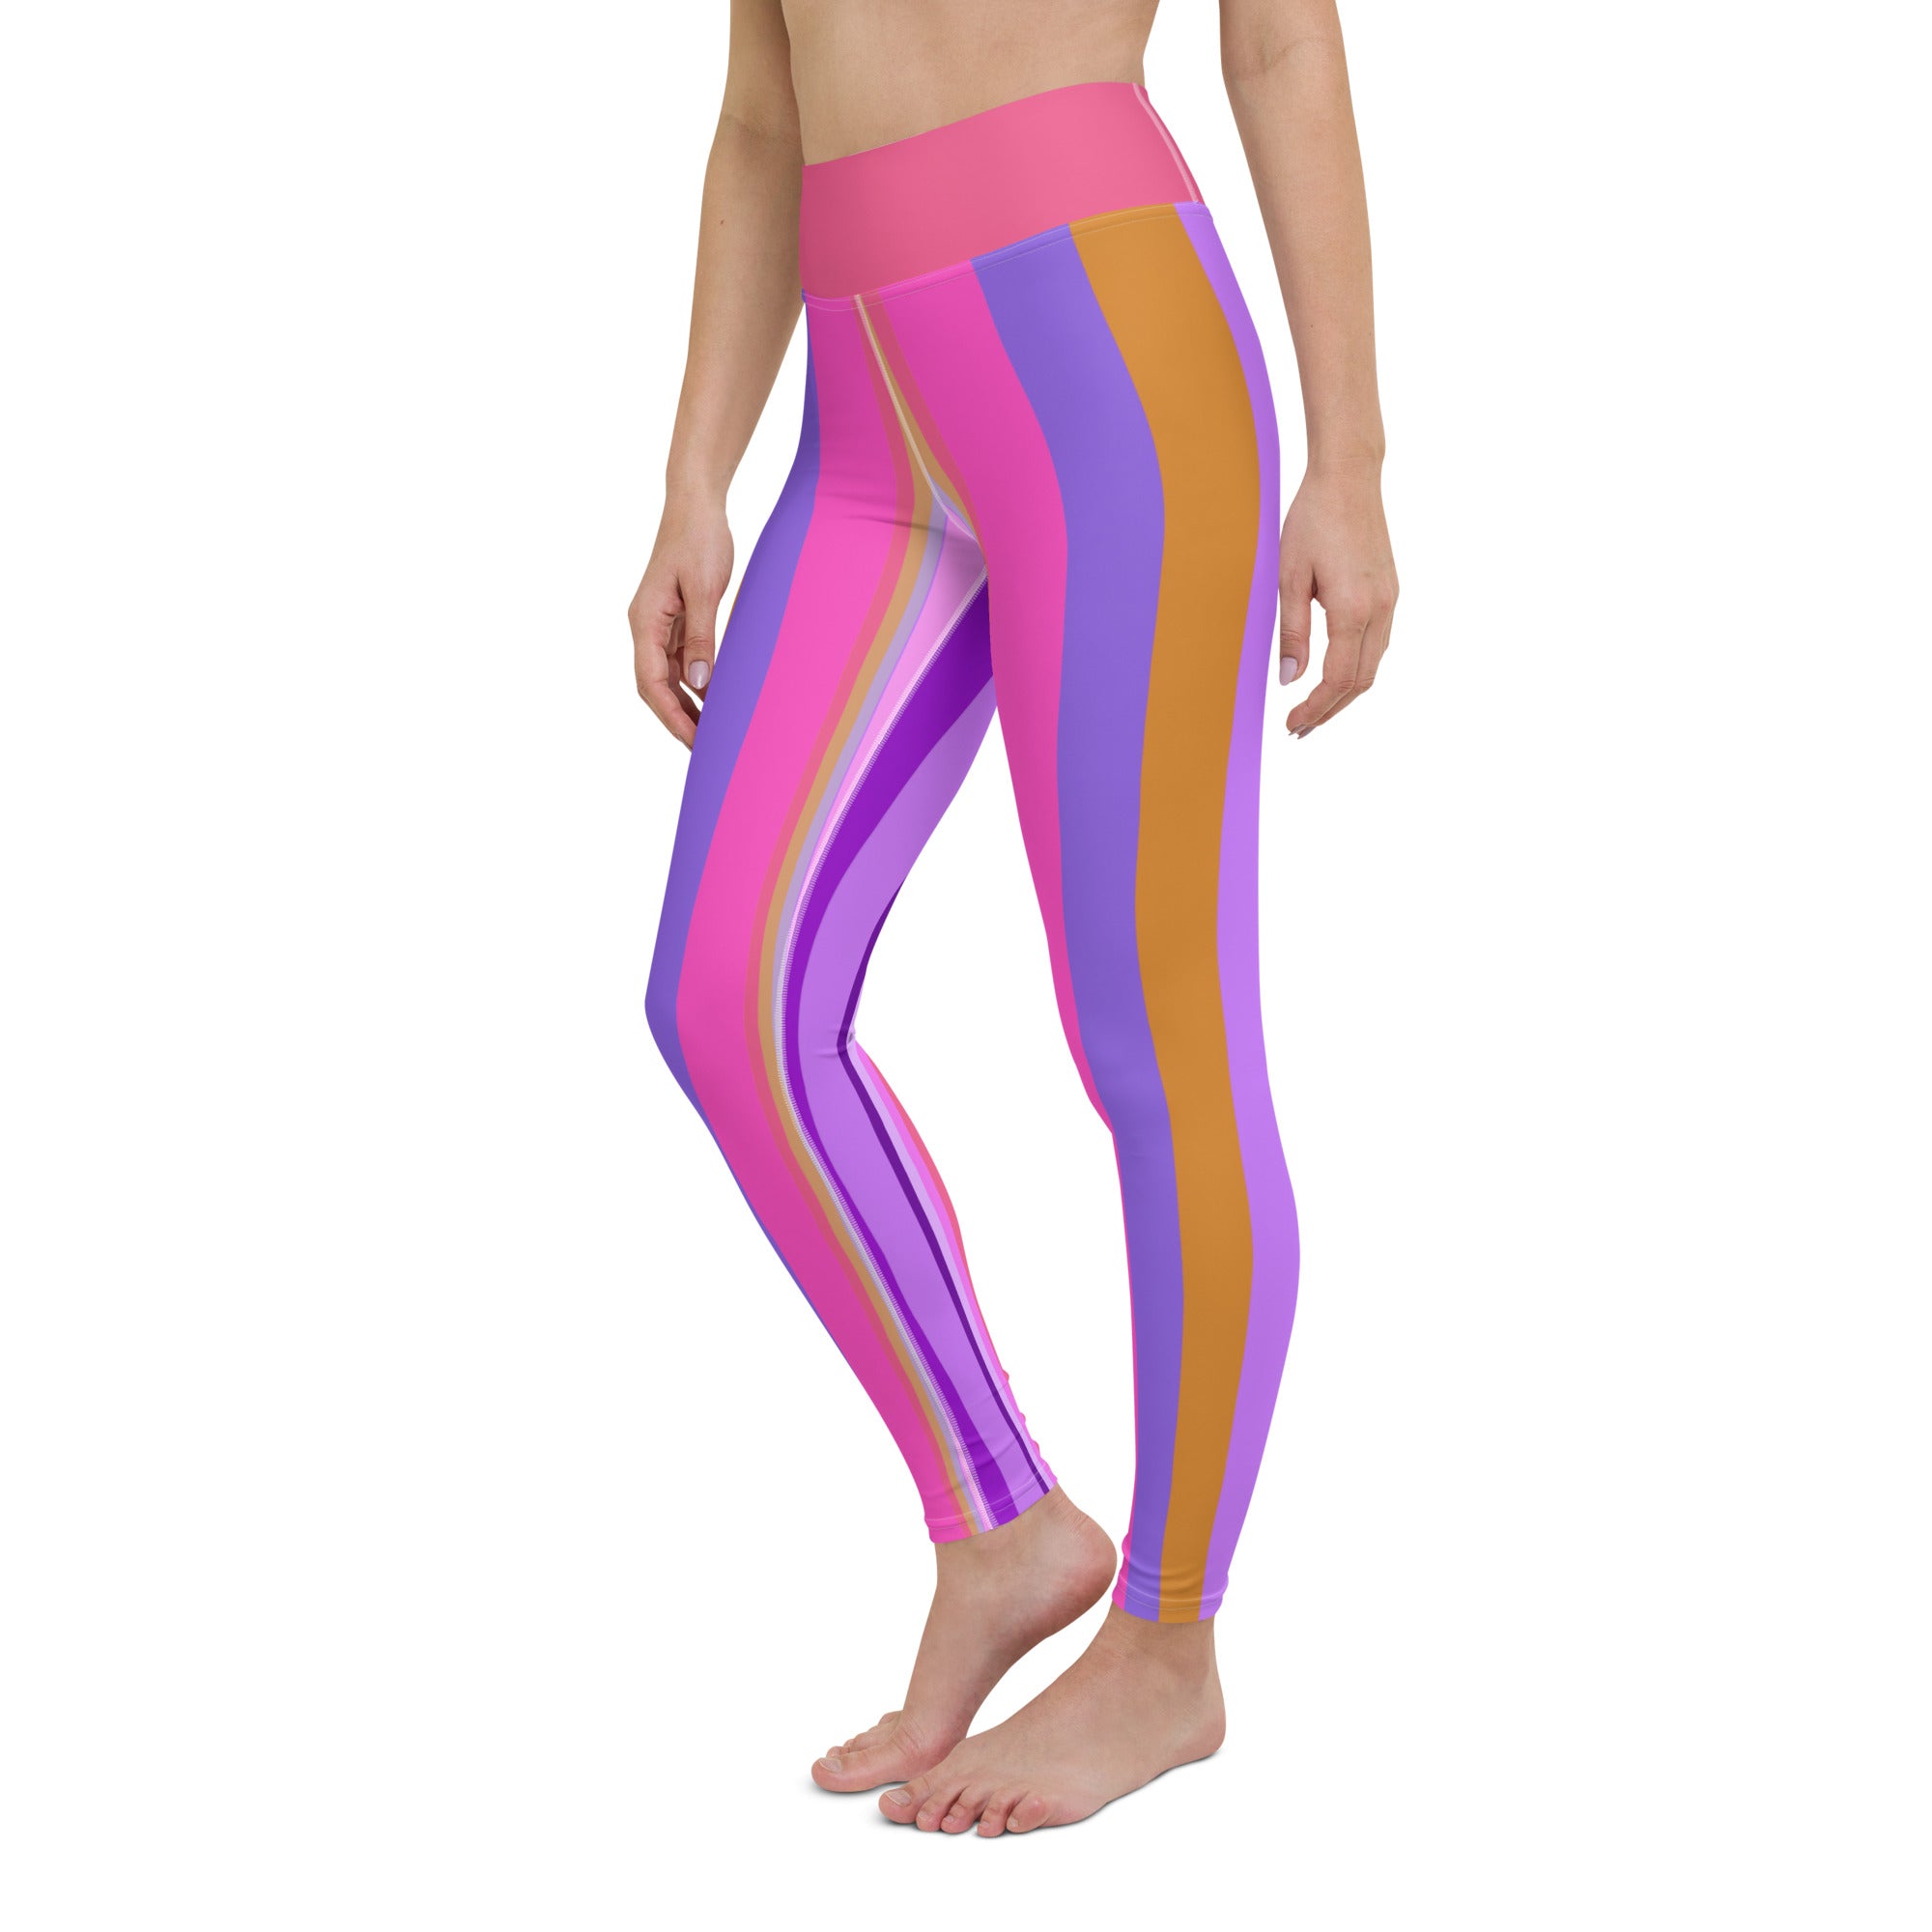 Comfortable and durable Luminous Galaxy leggings, perfect for bringing the magic of the night sky to your fitness routine.